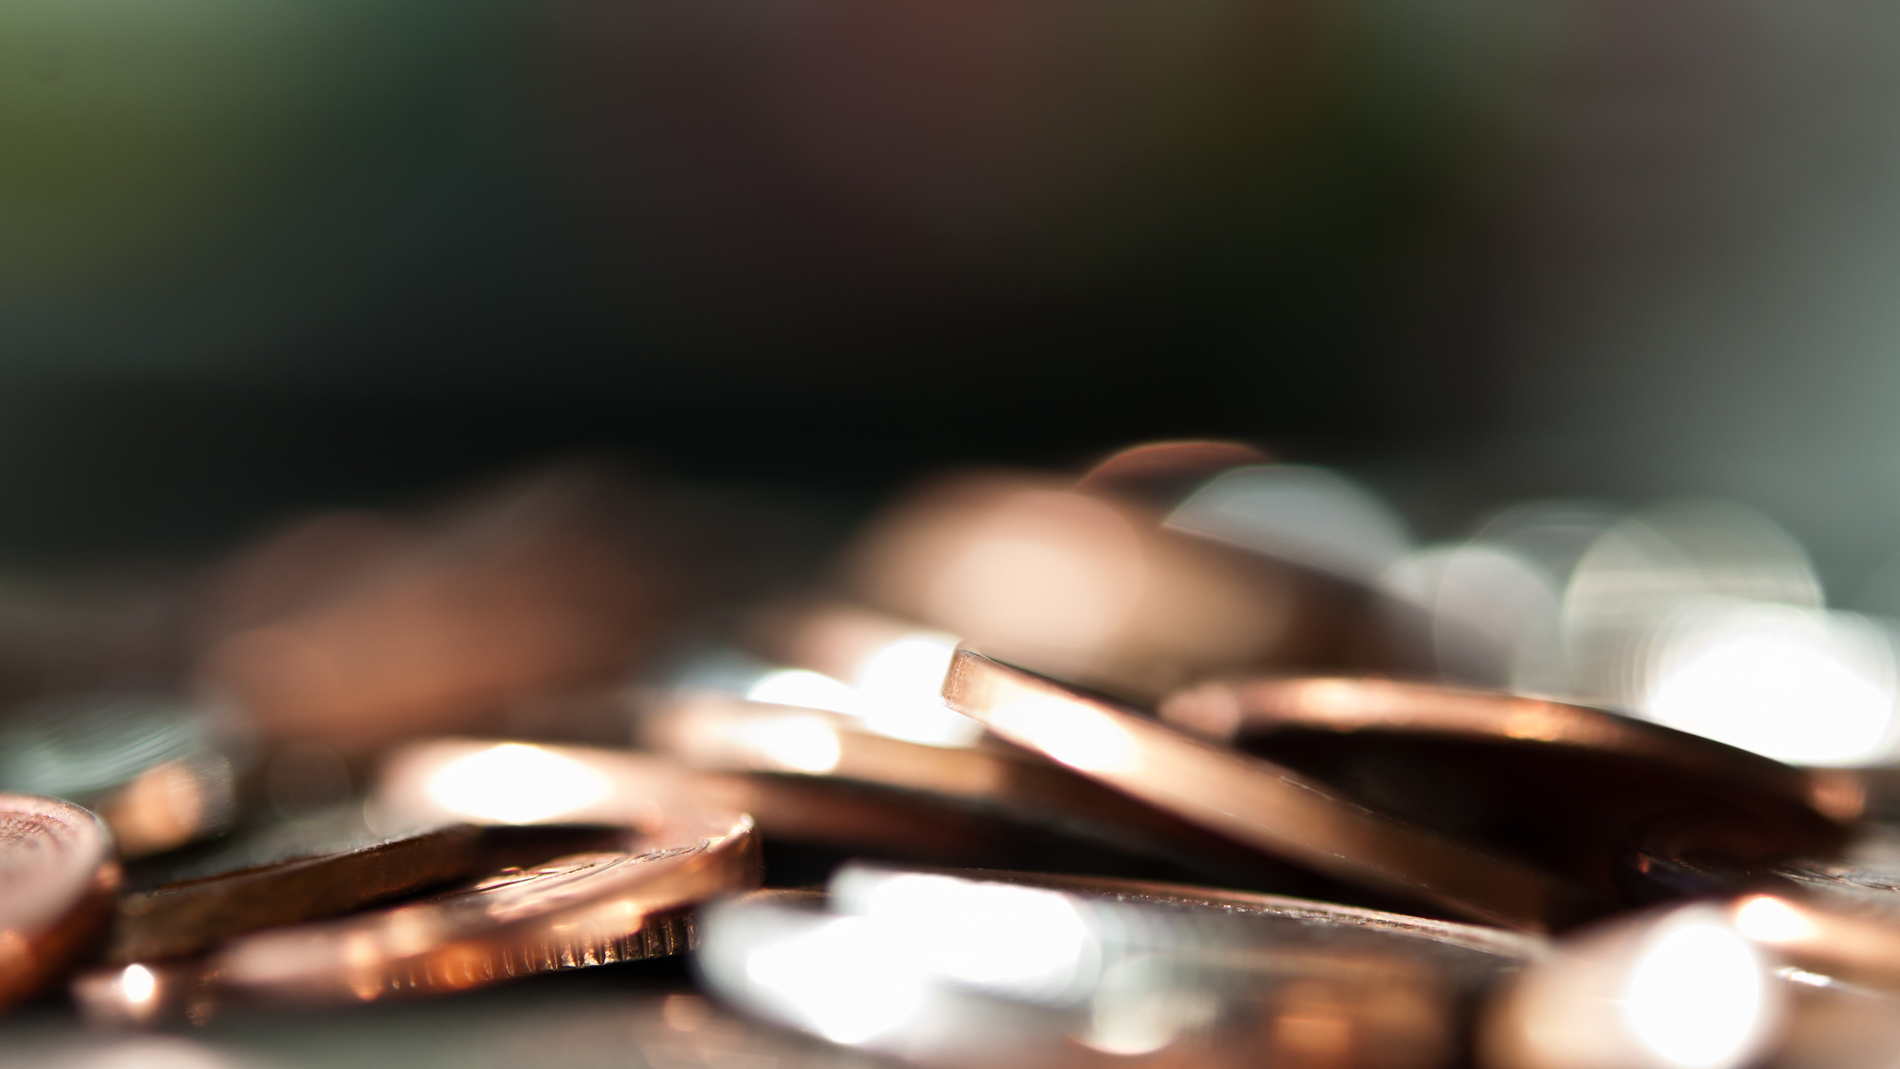 A pile of out of focus coins